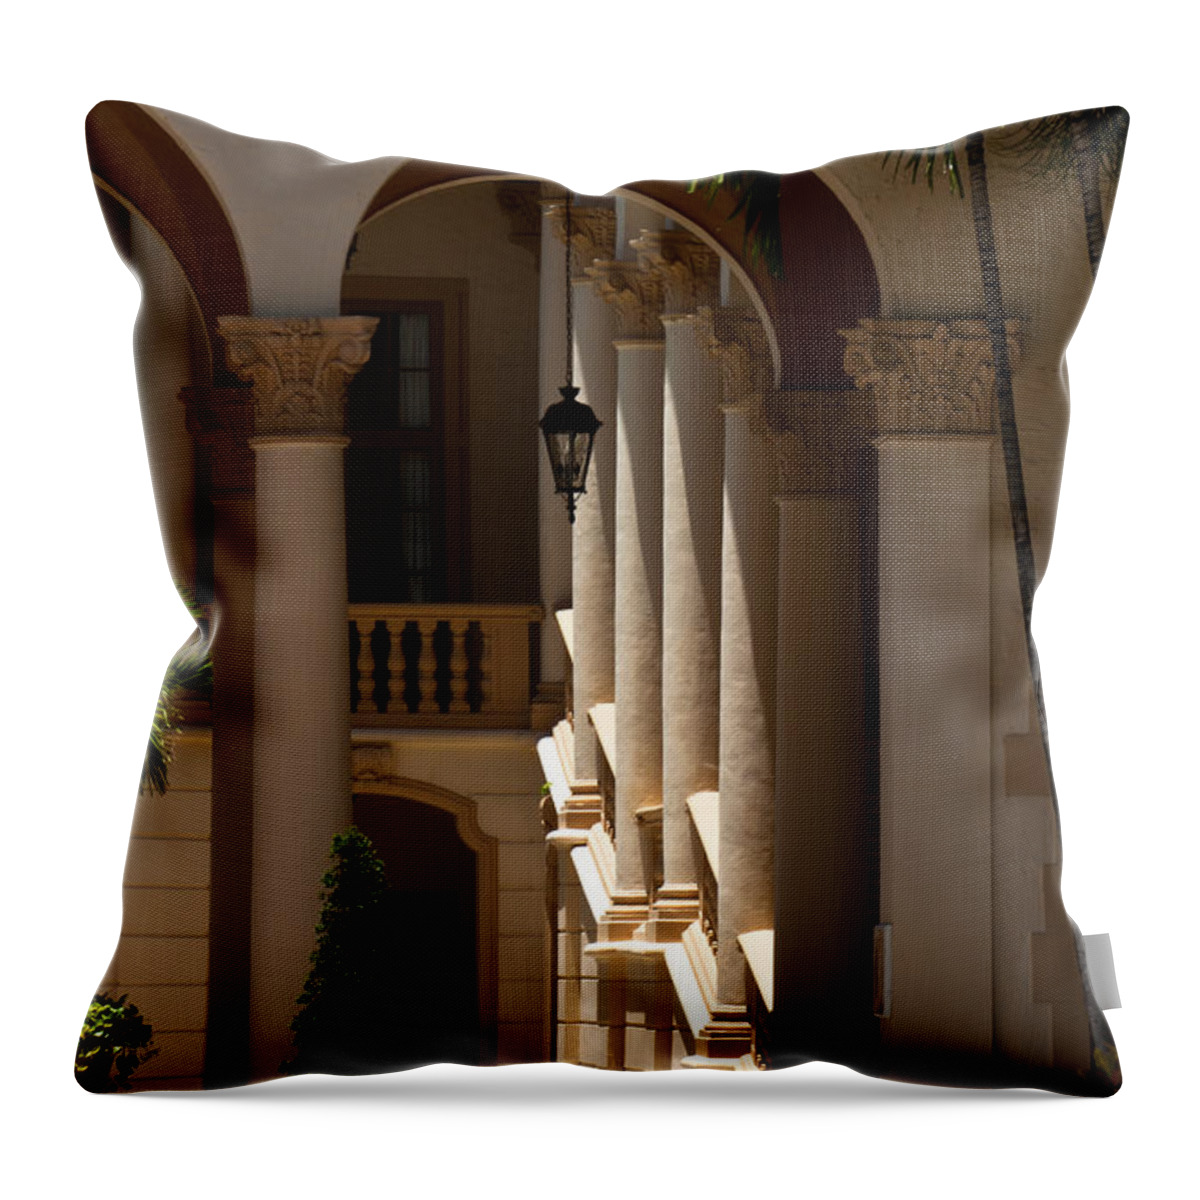 Biltmore Throw Pillow featuring the photograph Arches and Columns at the Biltmore Hotel by Ed Gleichman